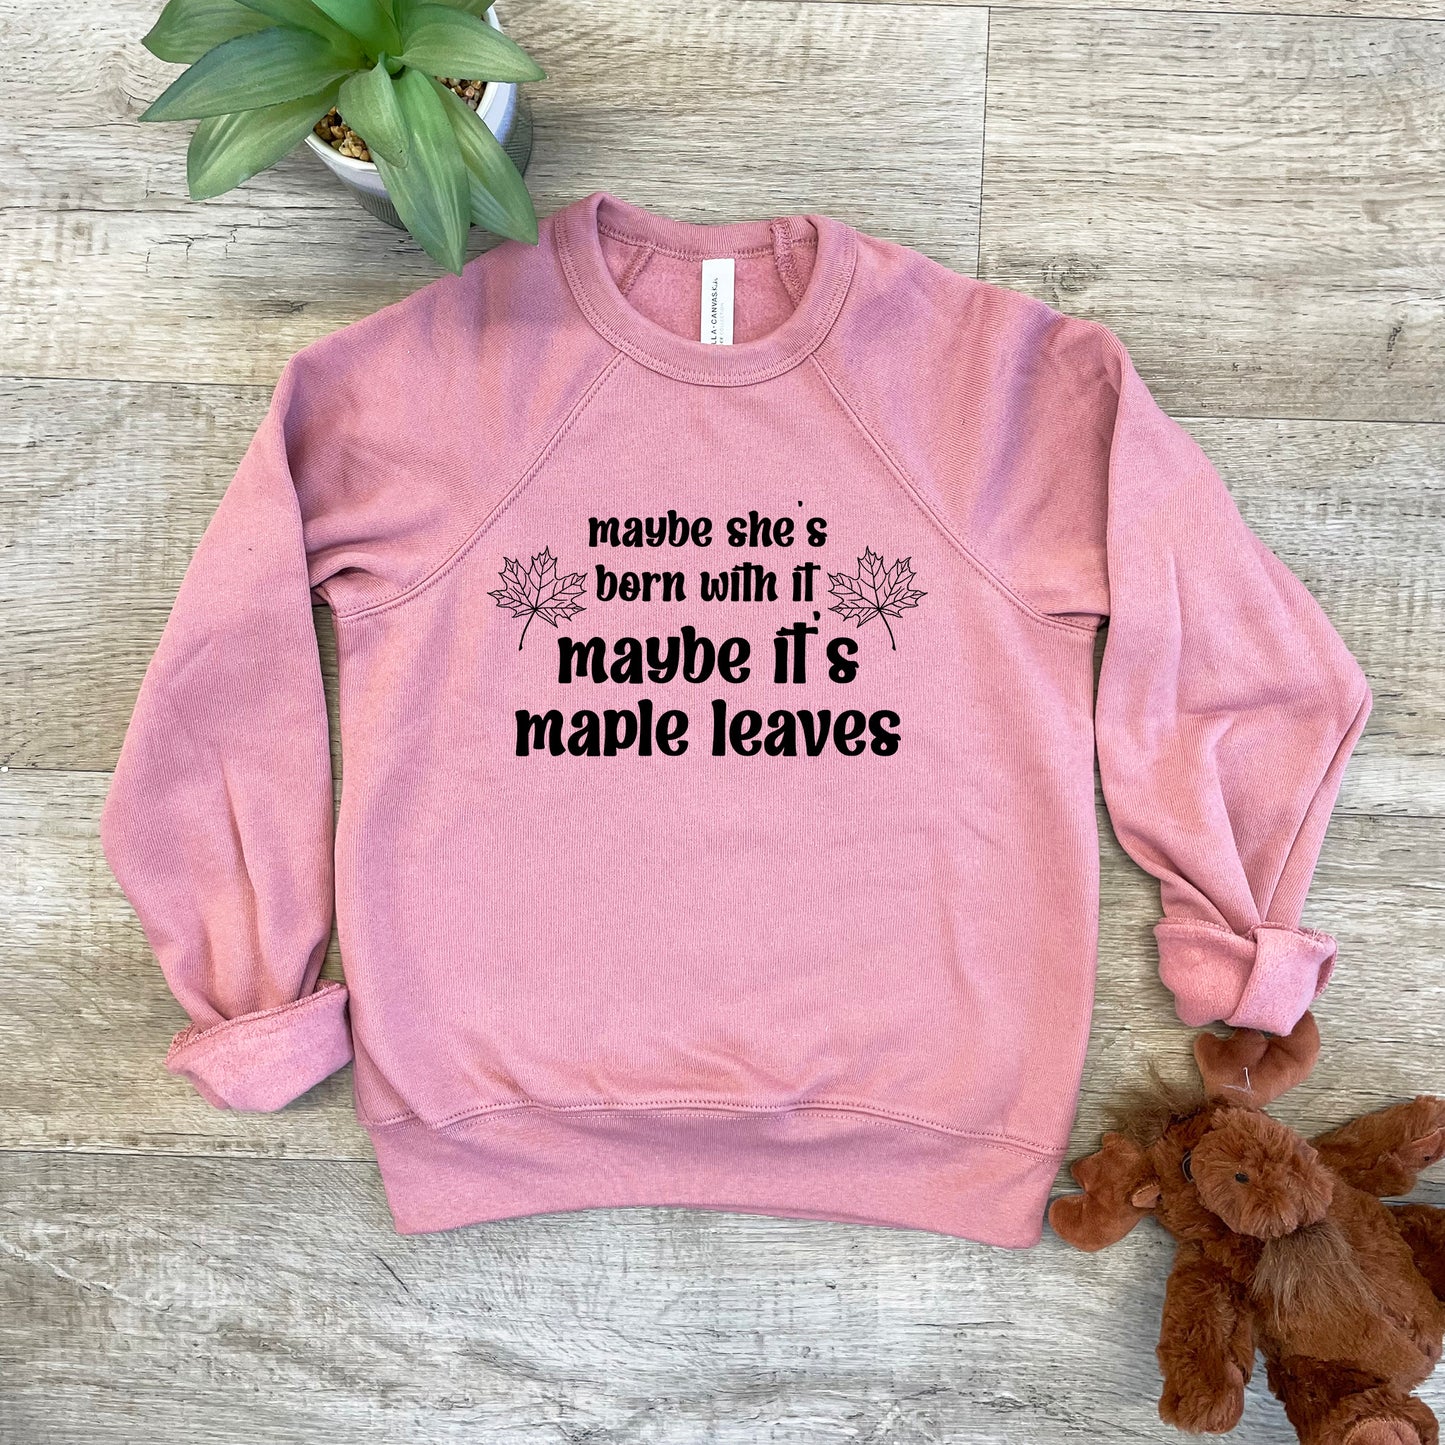 Maybe She's Born With It, Maybe It's Maple Leaves - Kid's Sweatshirt - Heather Gray or Mauve